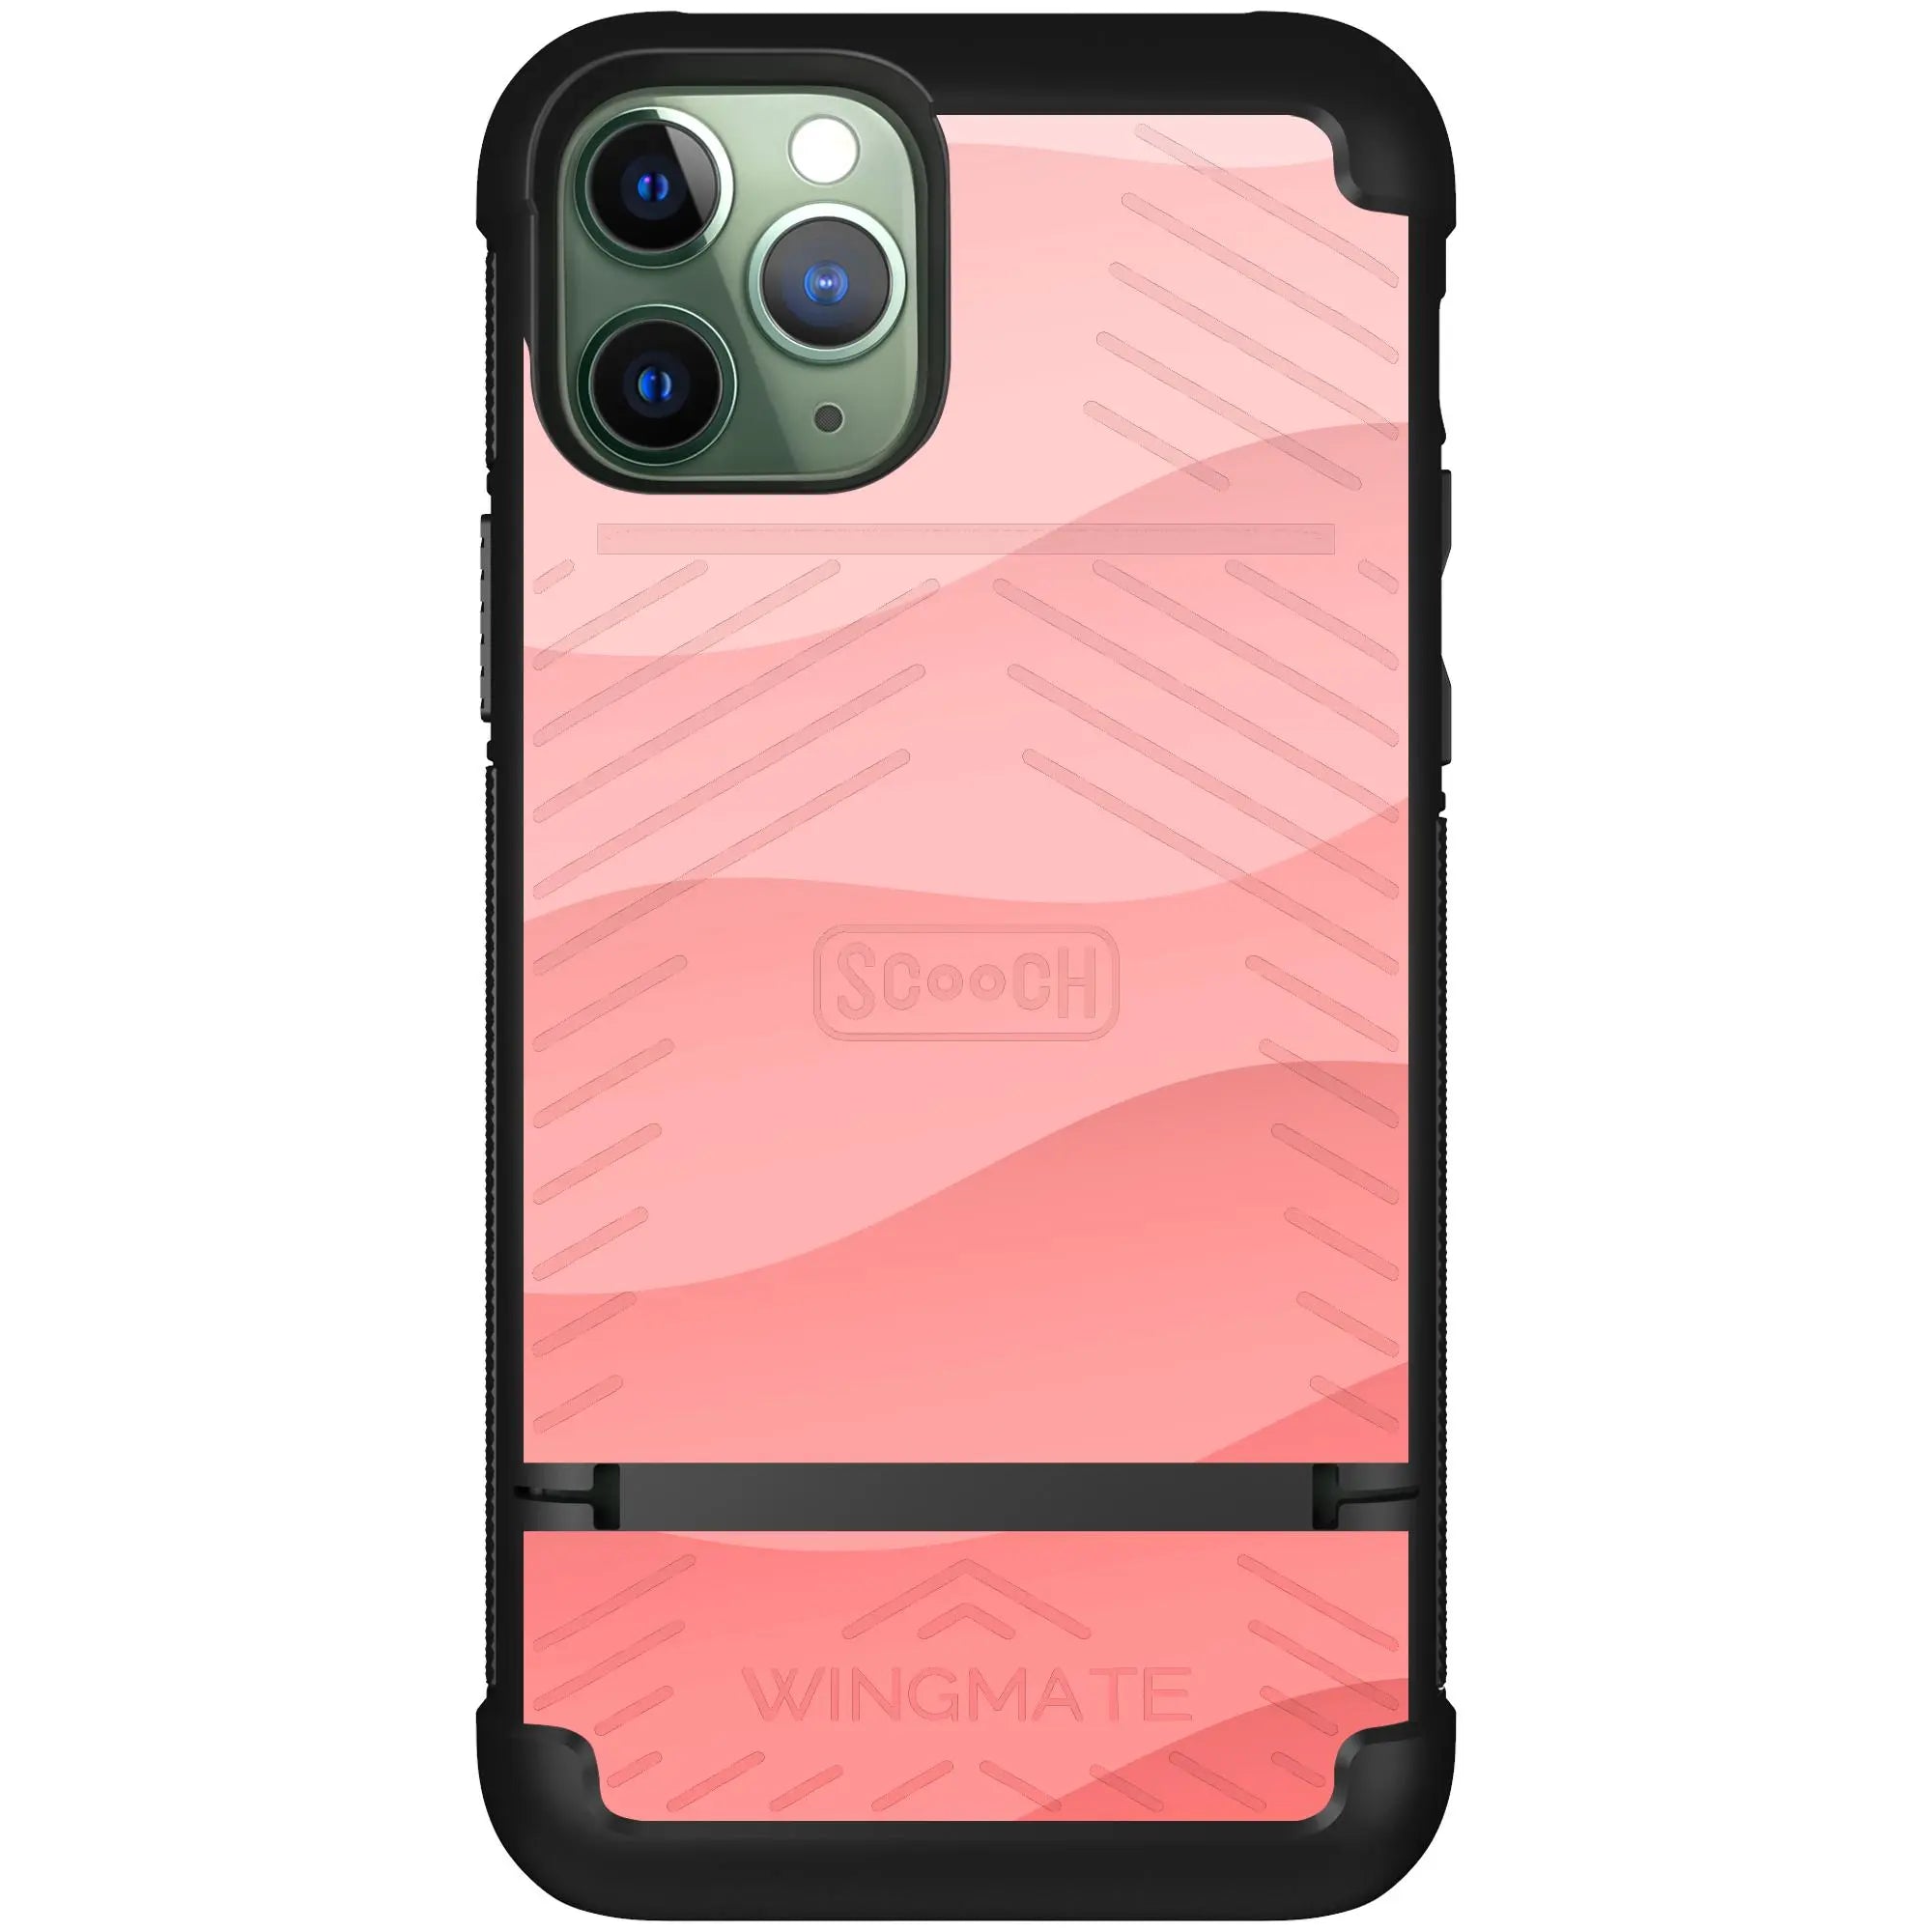 Scooch-Wingmate for iPhone 11 Pro-Pink-Waves